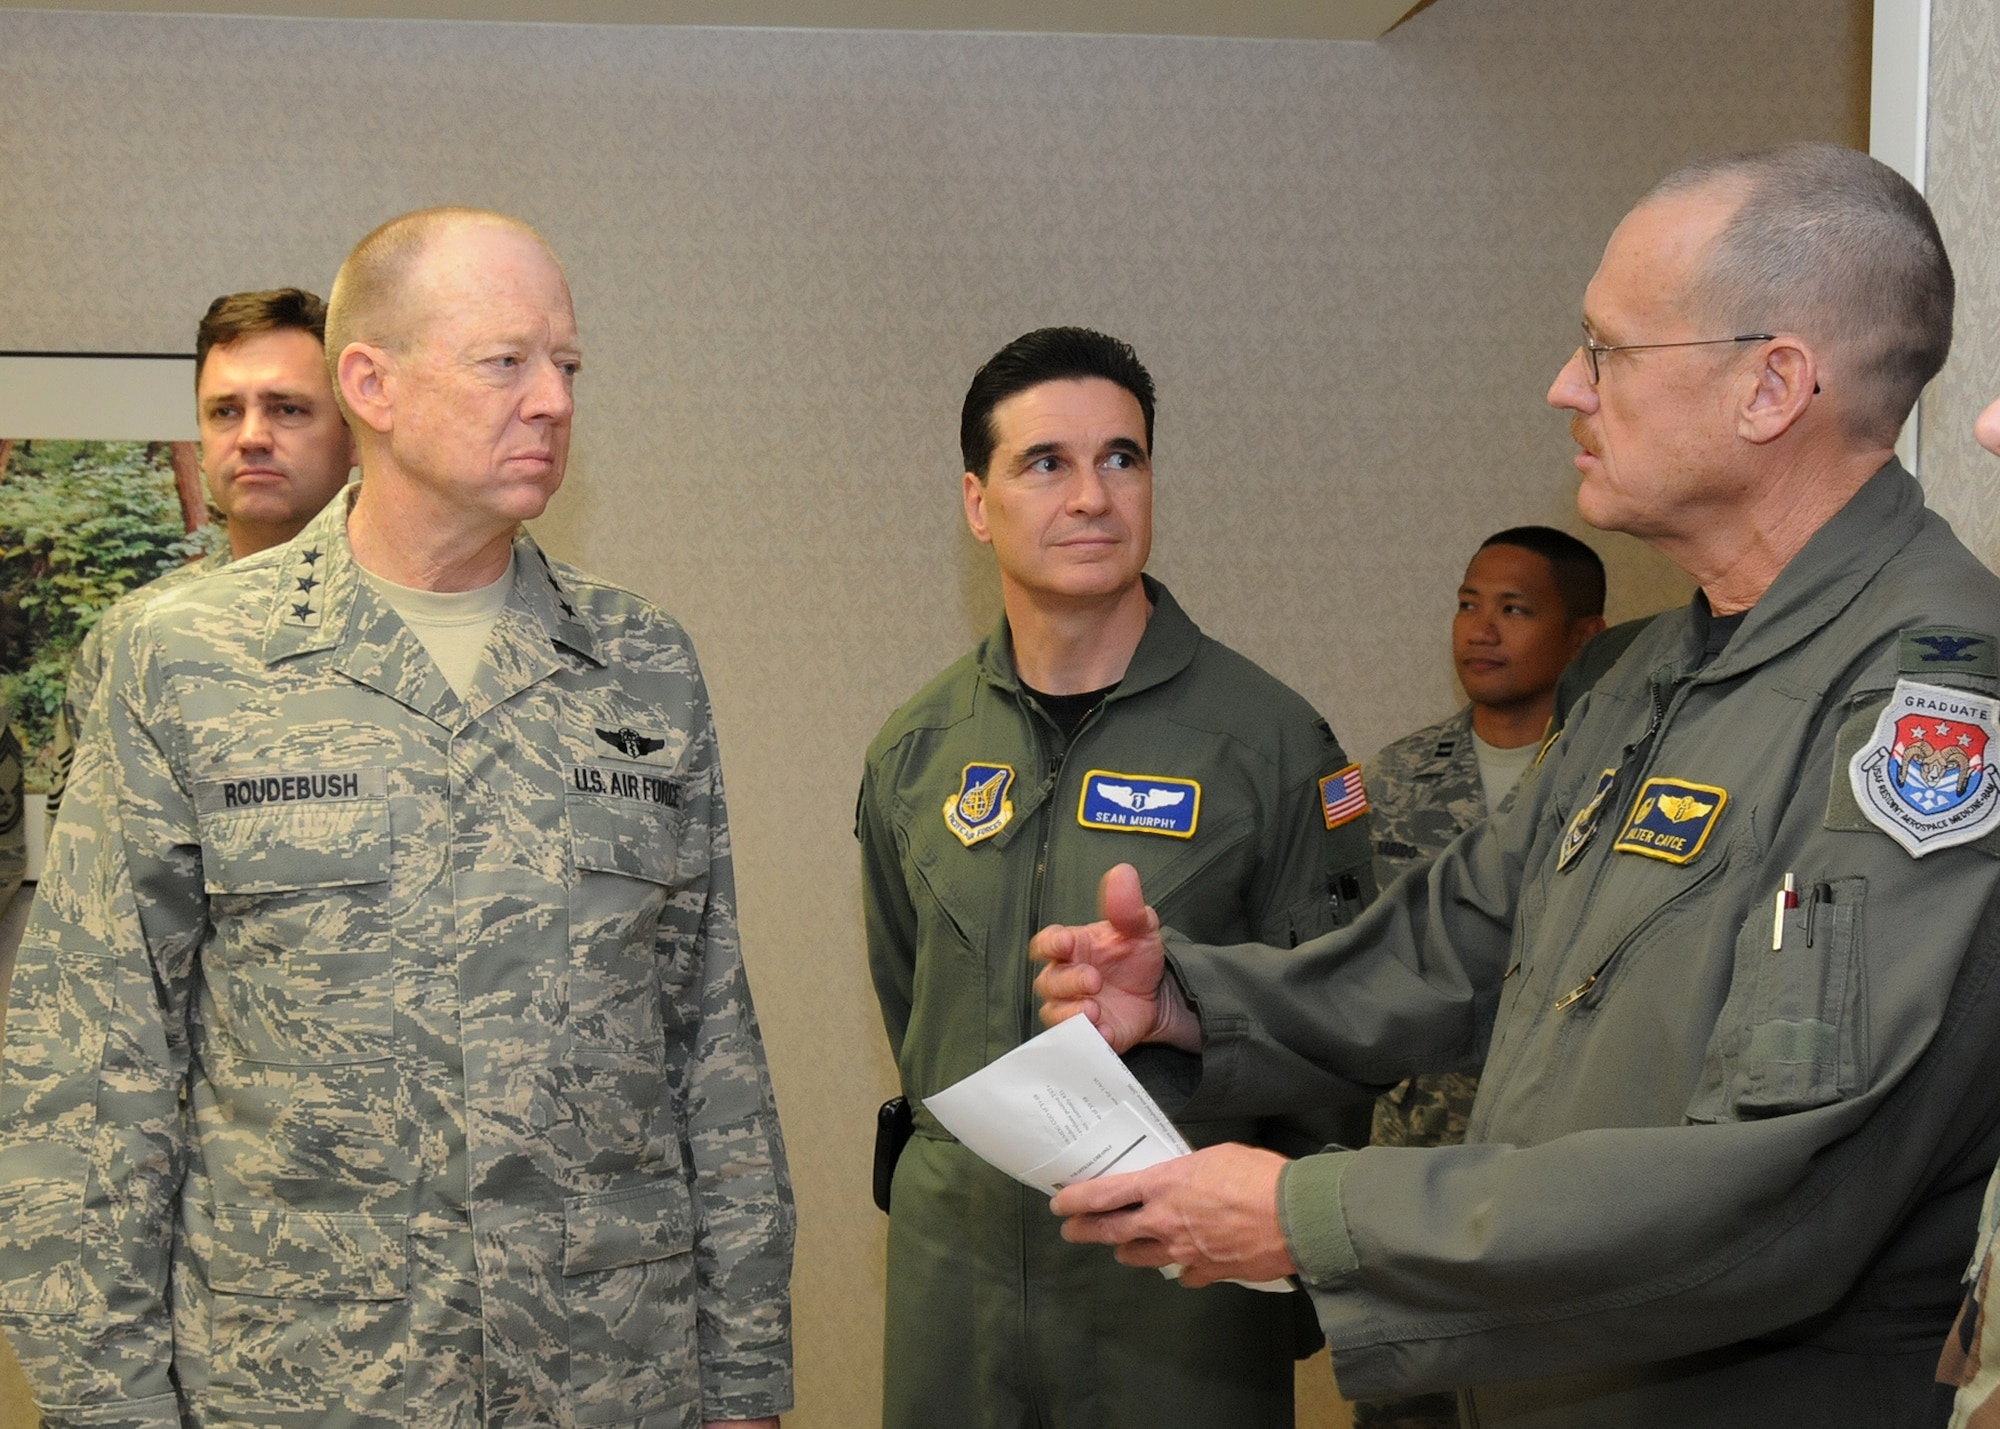 ANDERSEN AIR FORCE BASE, Guam - Colonel 
Walter Cayce, 36th Medical Group commander briefs Lt. Gen. James Roudebush, U.S. Air Force Surgeon General on the capabilities and services provided by the 36th MDG during a site visit here Jan. 23. (U.S. Air Force photo by Senior Airman Nichelle Griffiths)